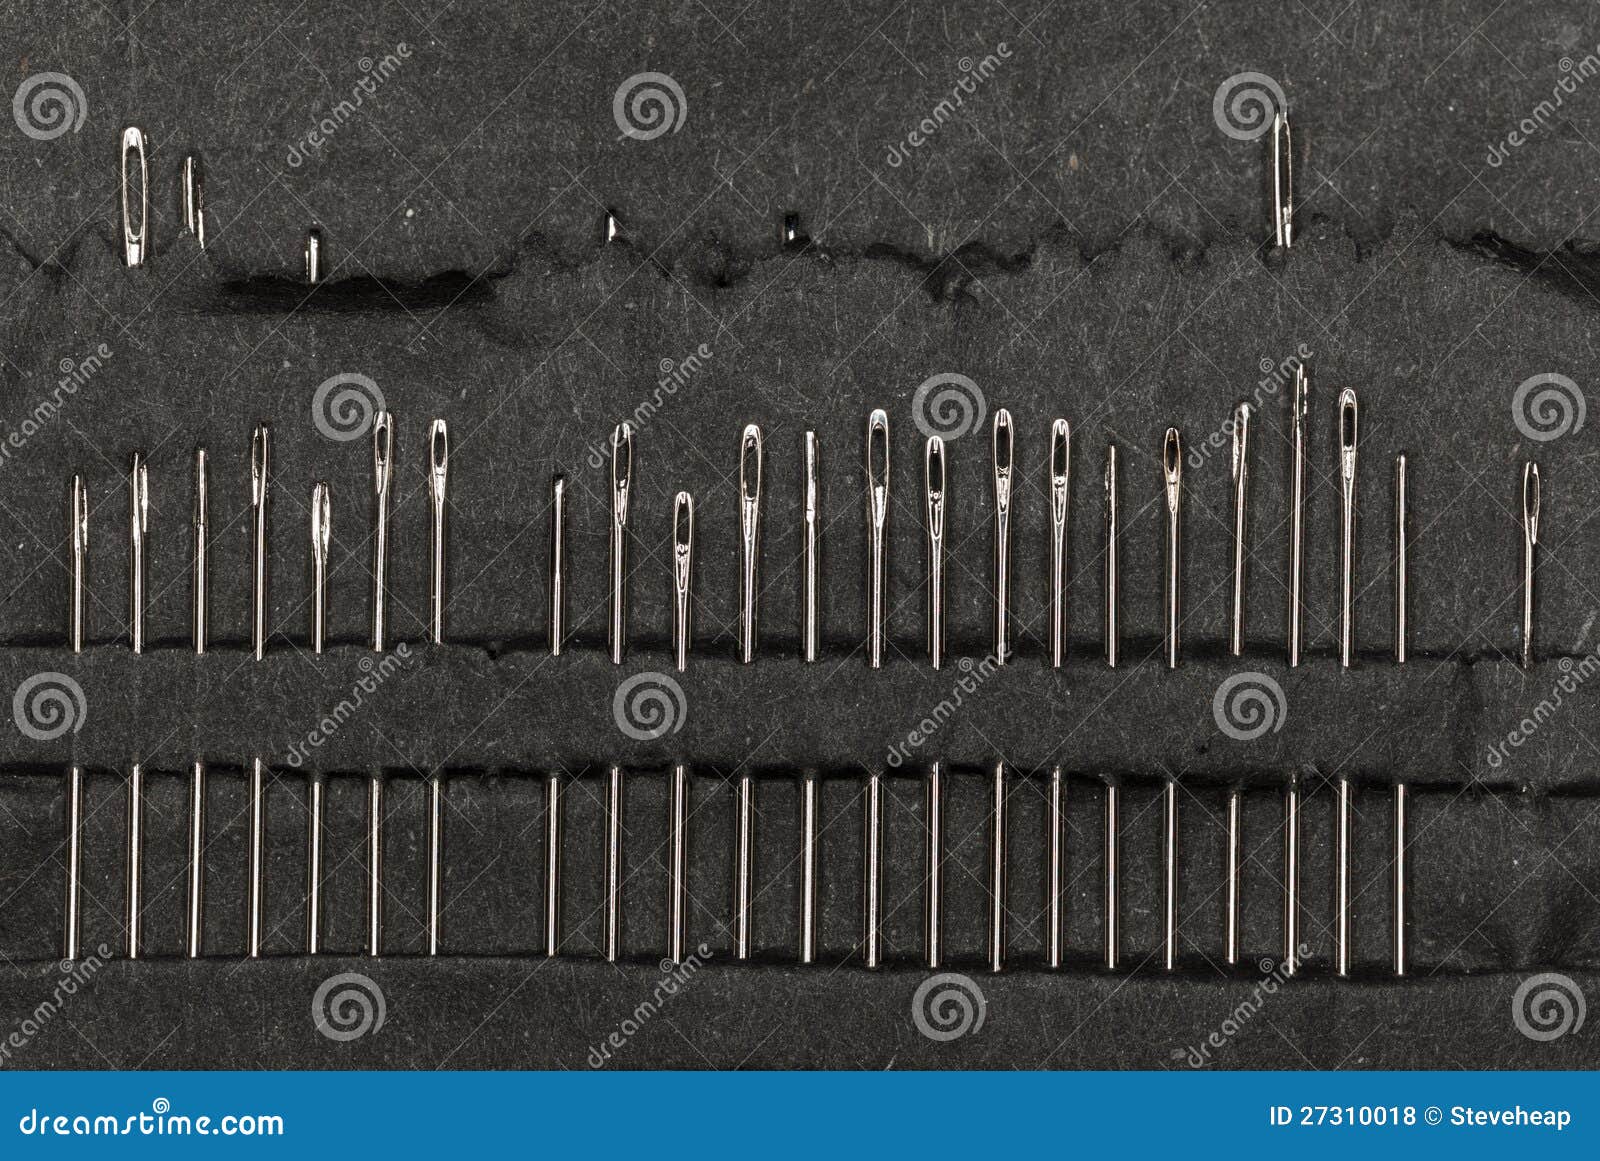 row of sewing needles in case